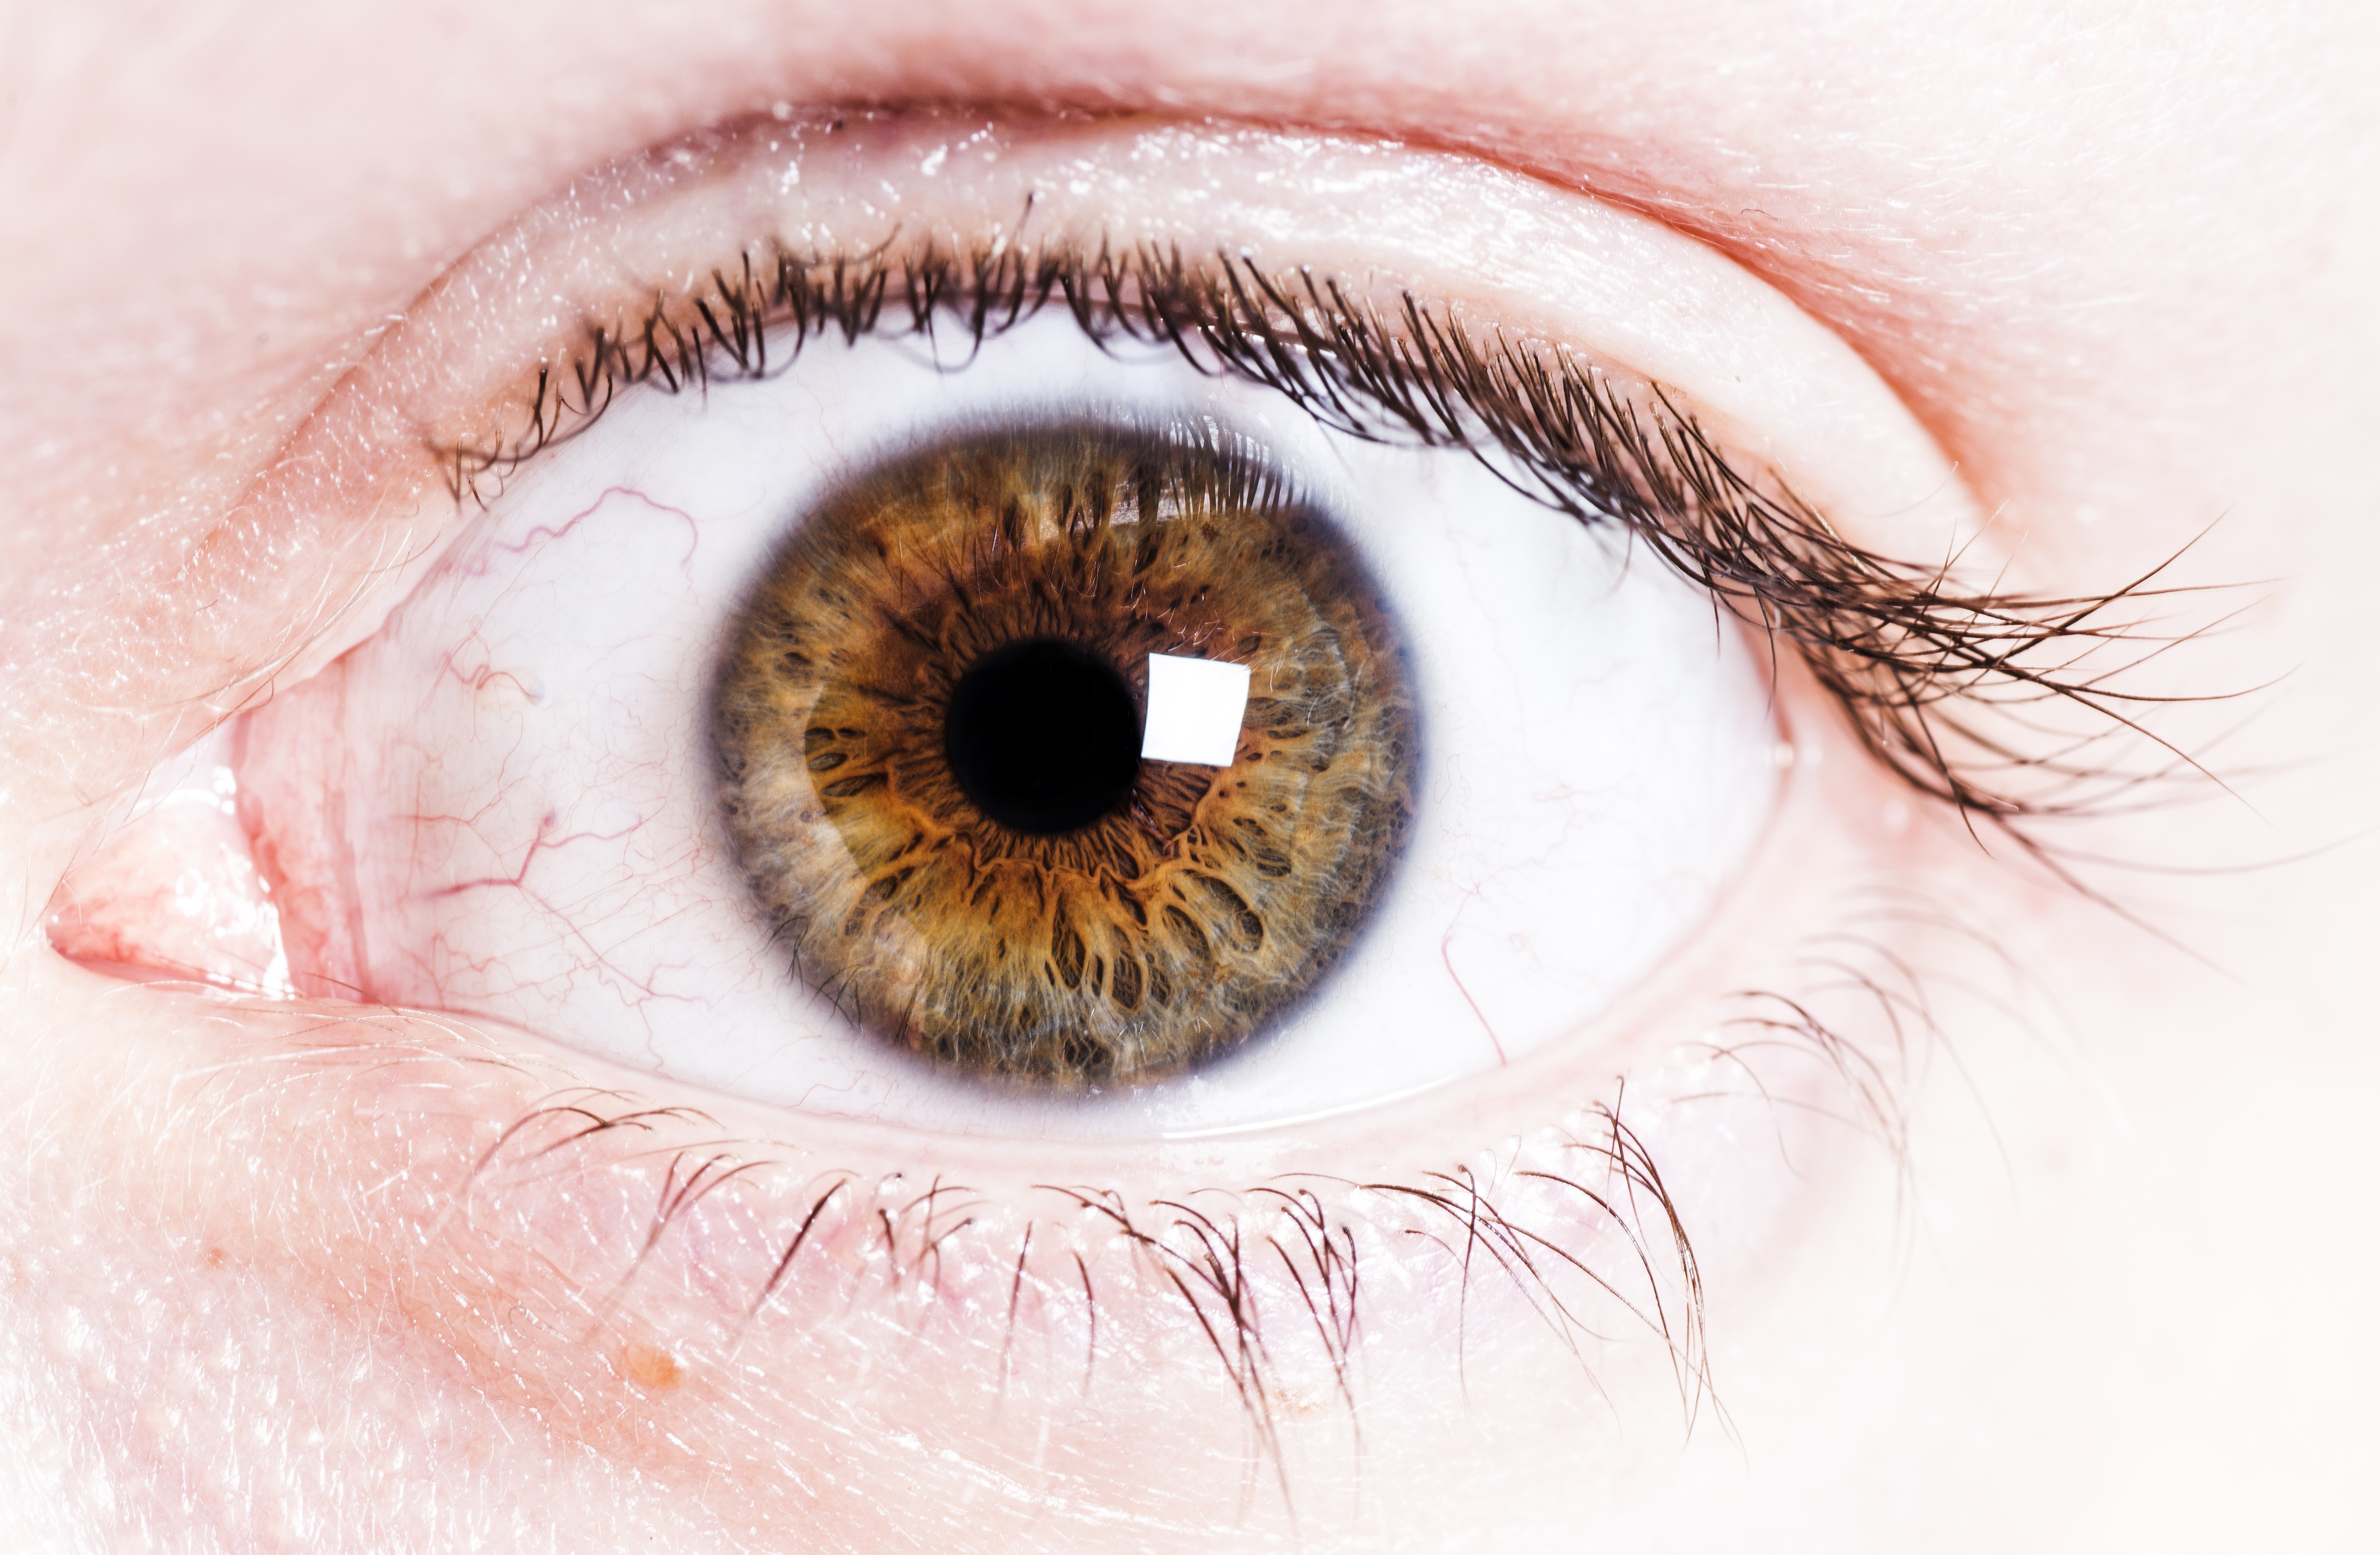  are the specks you see floating in the eye? How It Works Magazine